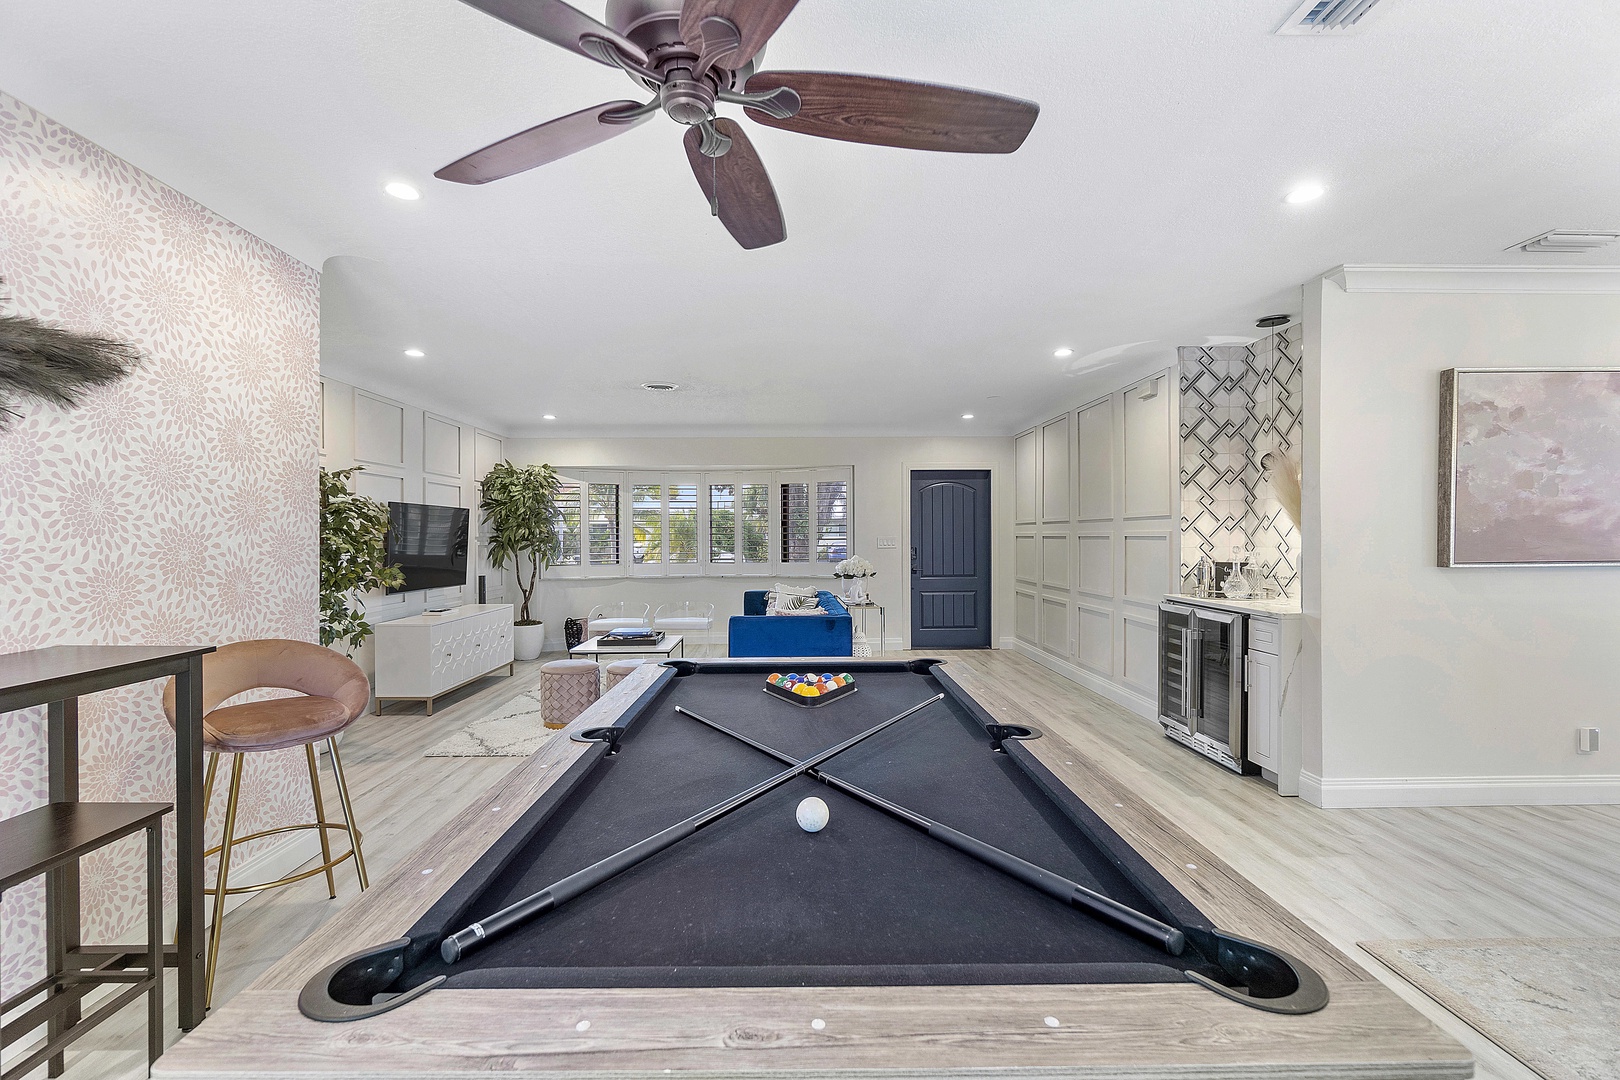 Game room with pool table and dry bar